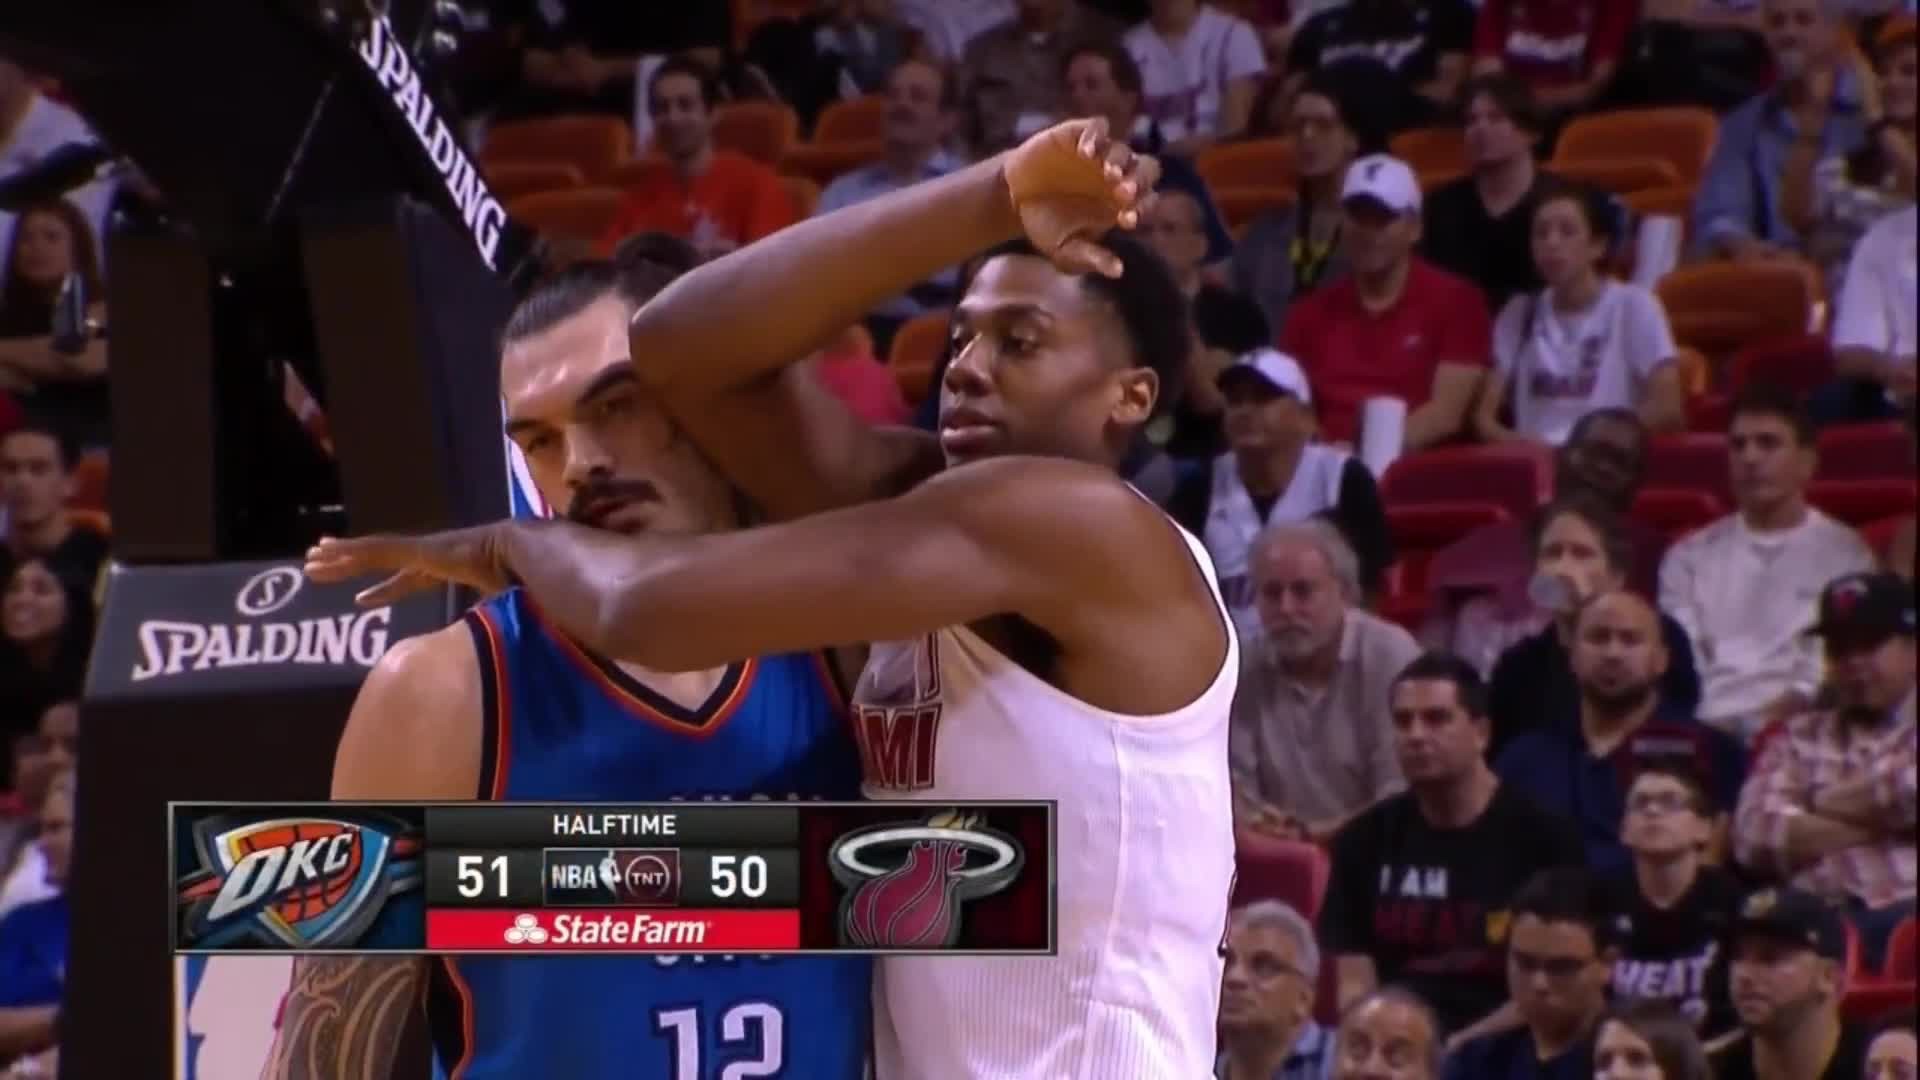 1920x1080 Hassan Whiteside's elbow is on Steven Adam's face, but Adams doesn't mind